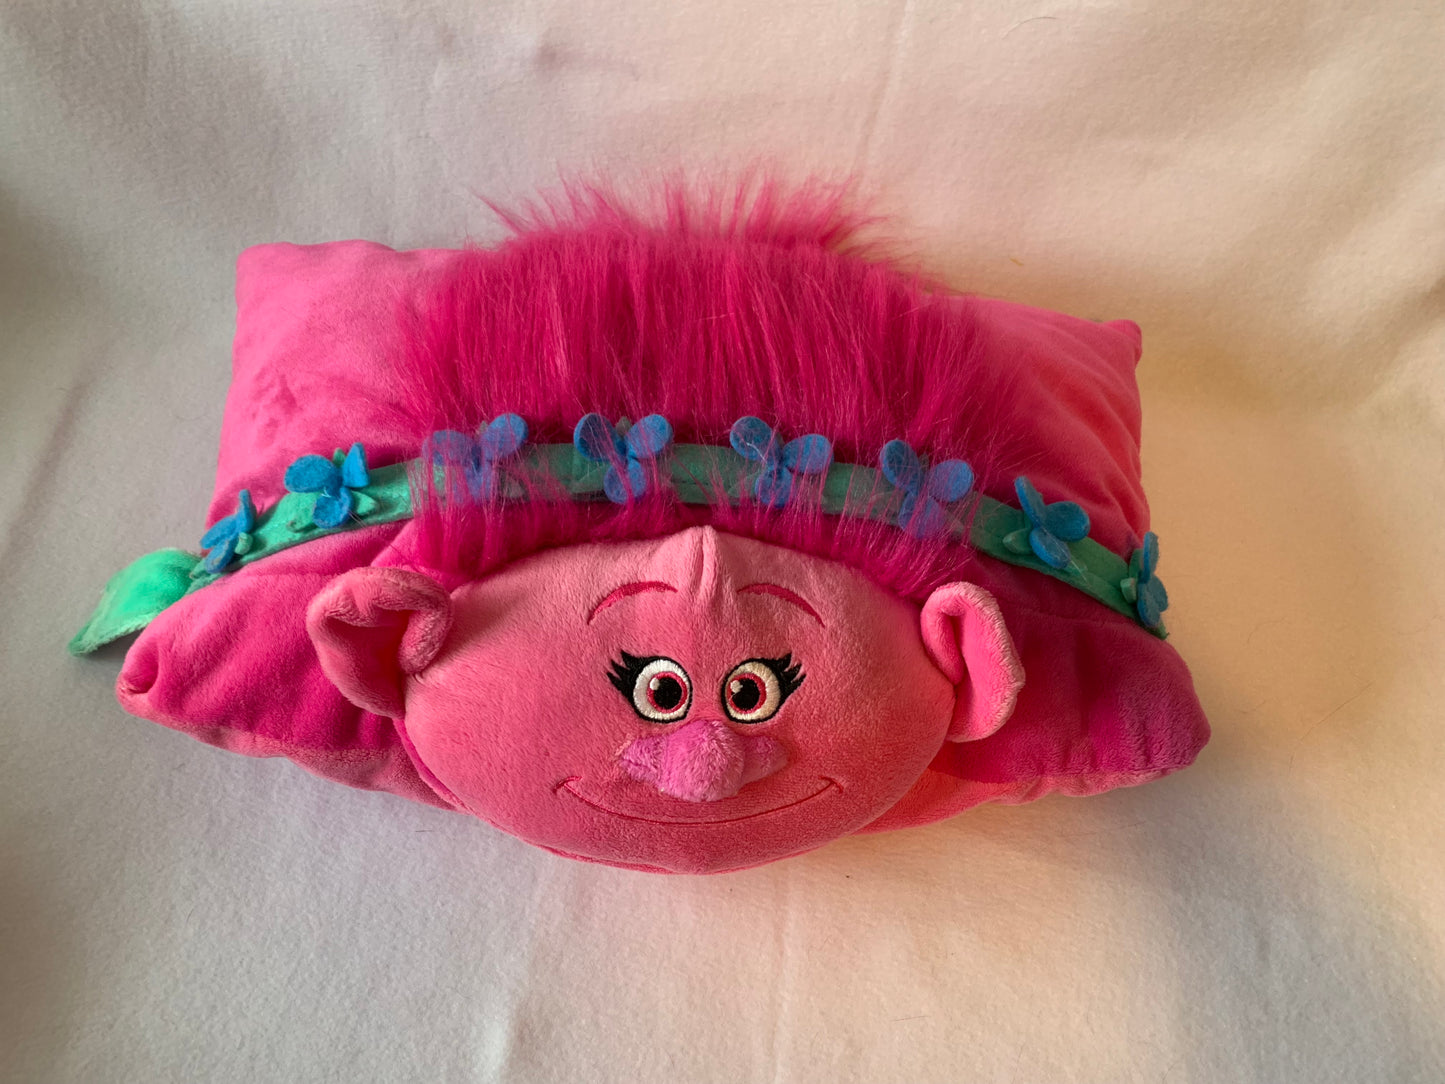 Weighted Lap Pad, Pillow Pet, small weighted buddy with 3 lbs, SENSORY LAP PAD, turtle, troll, dog or seal